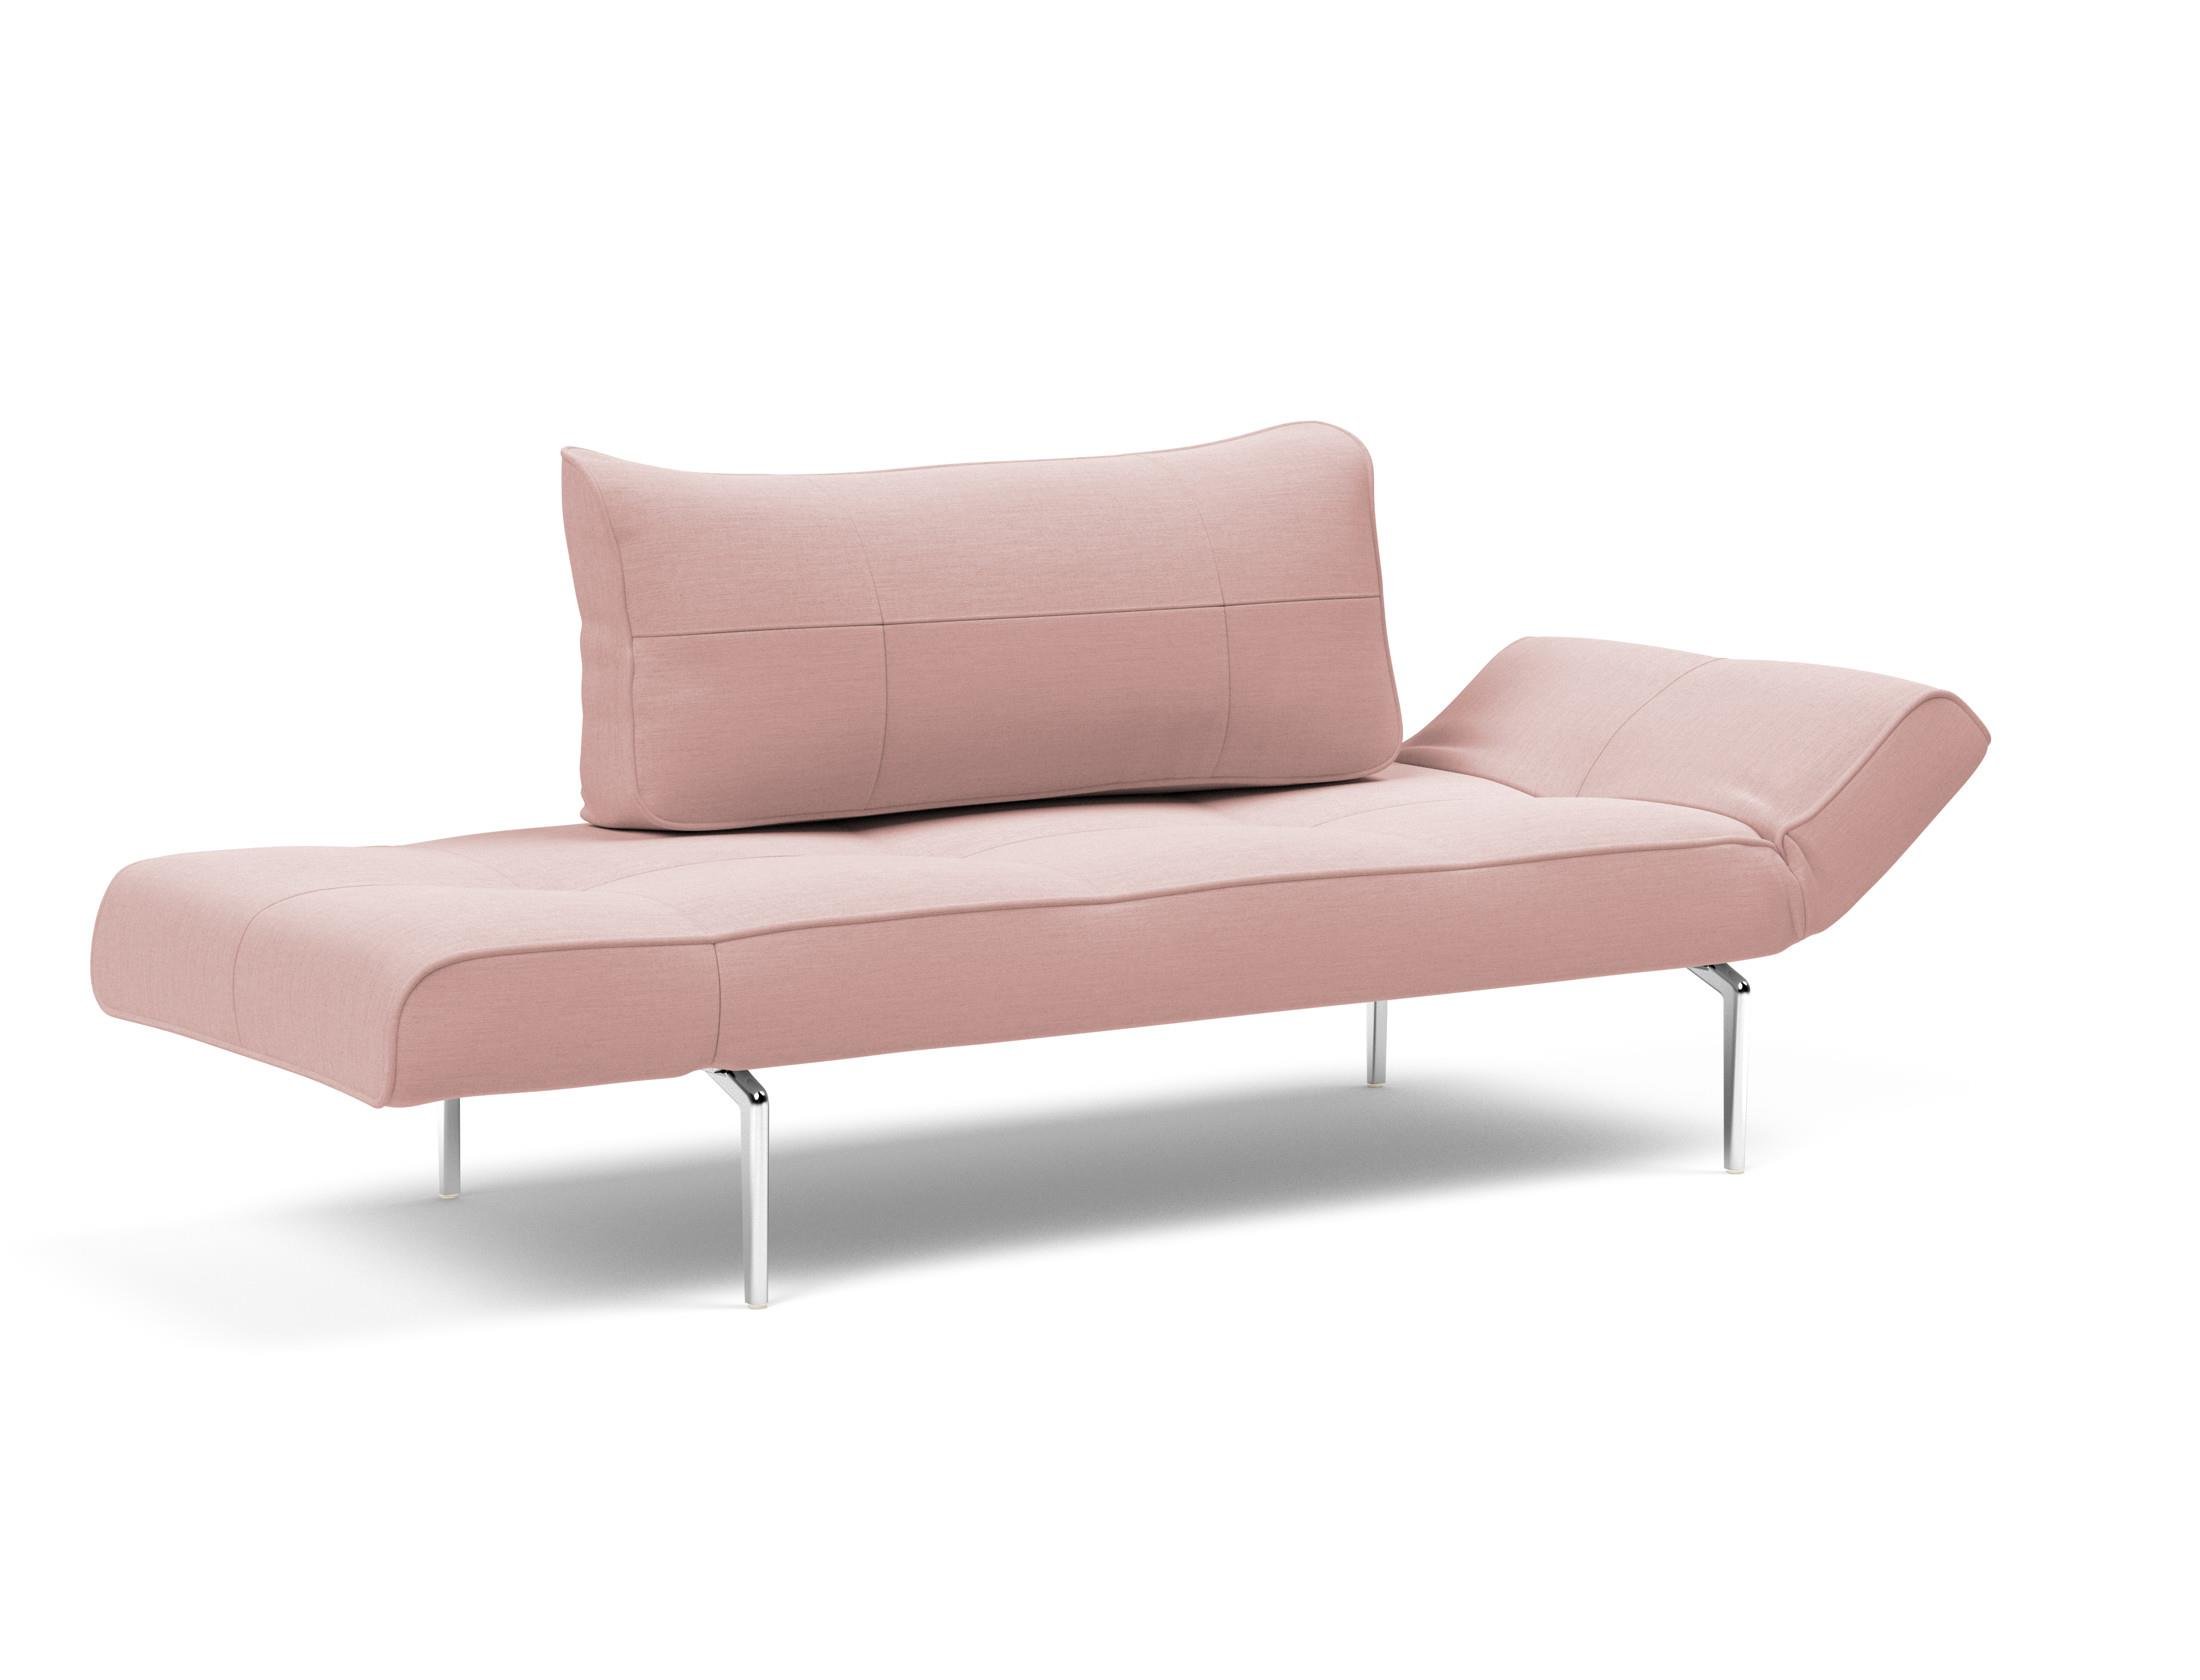 Zeal-Straw-Daybed-570-p6-web.jpg